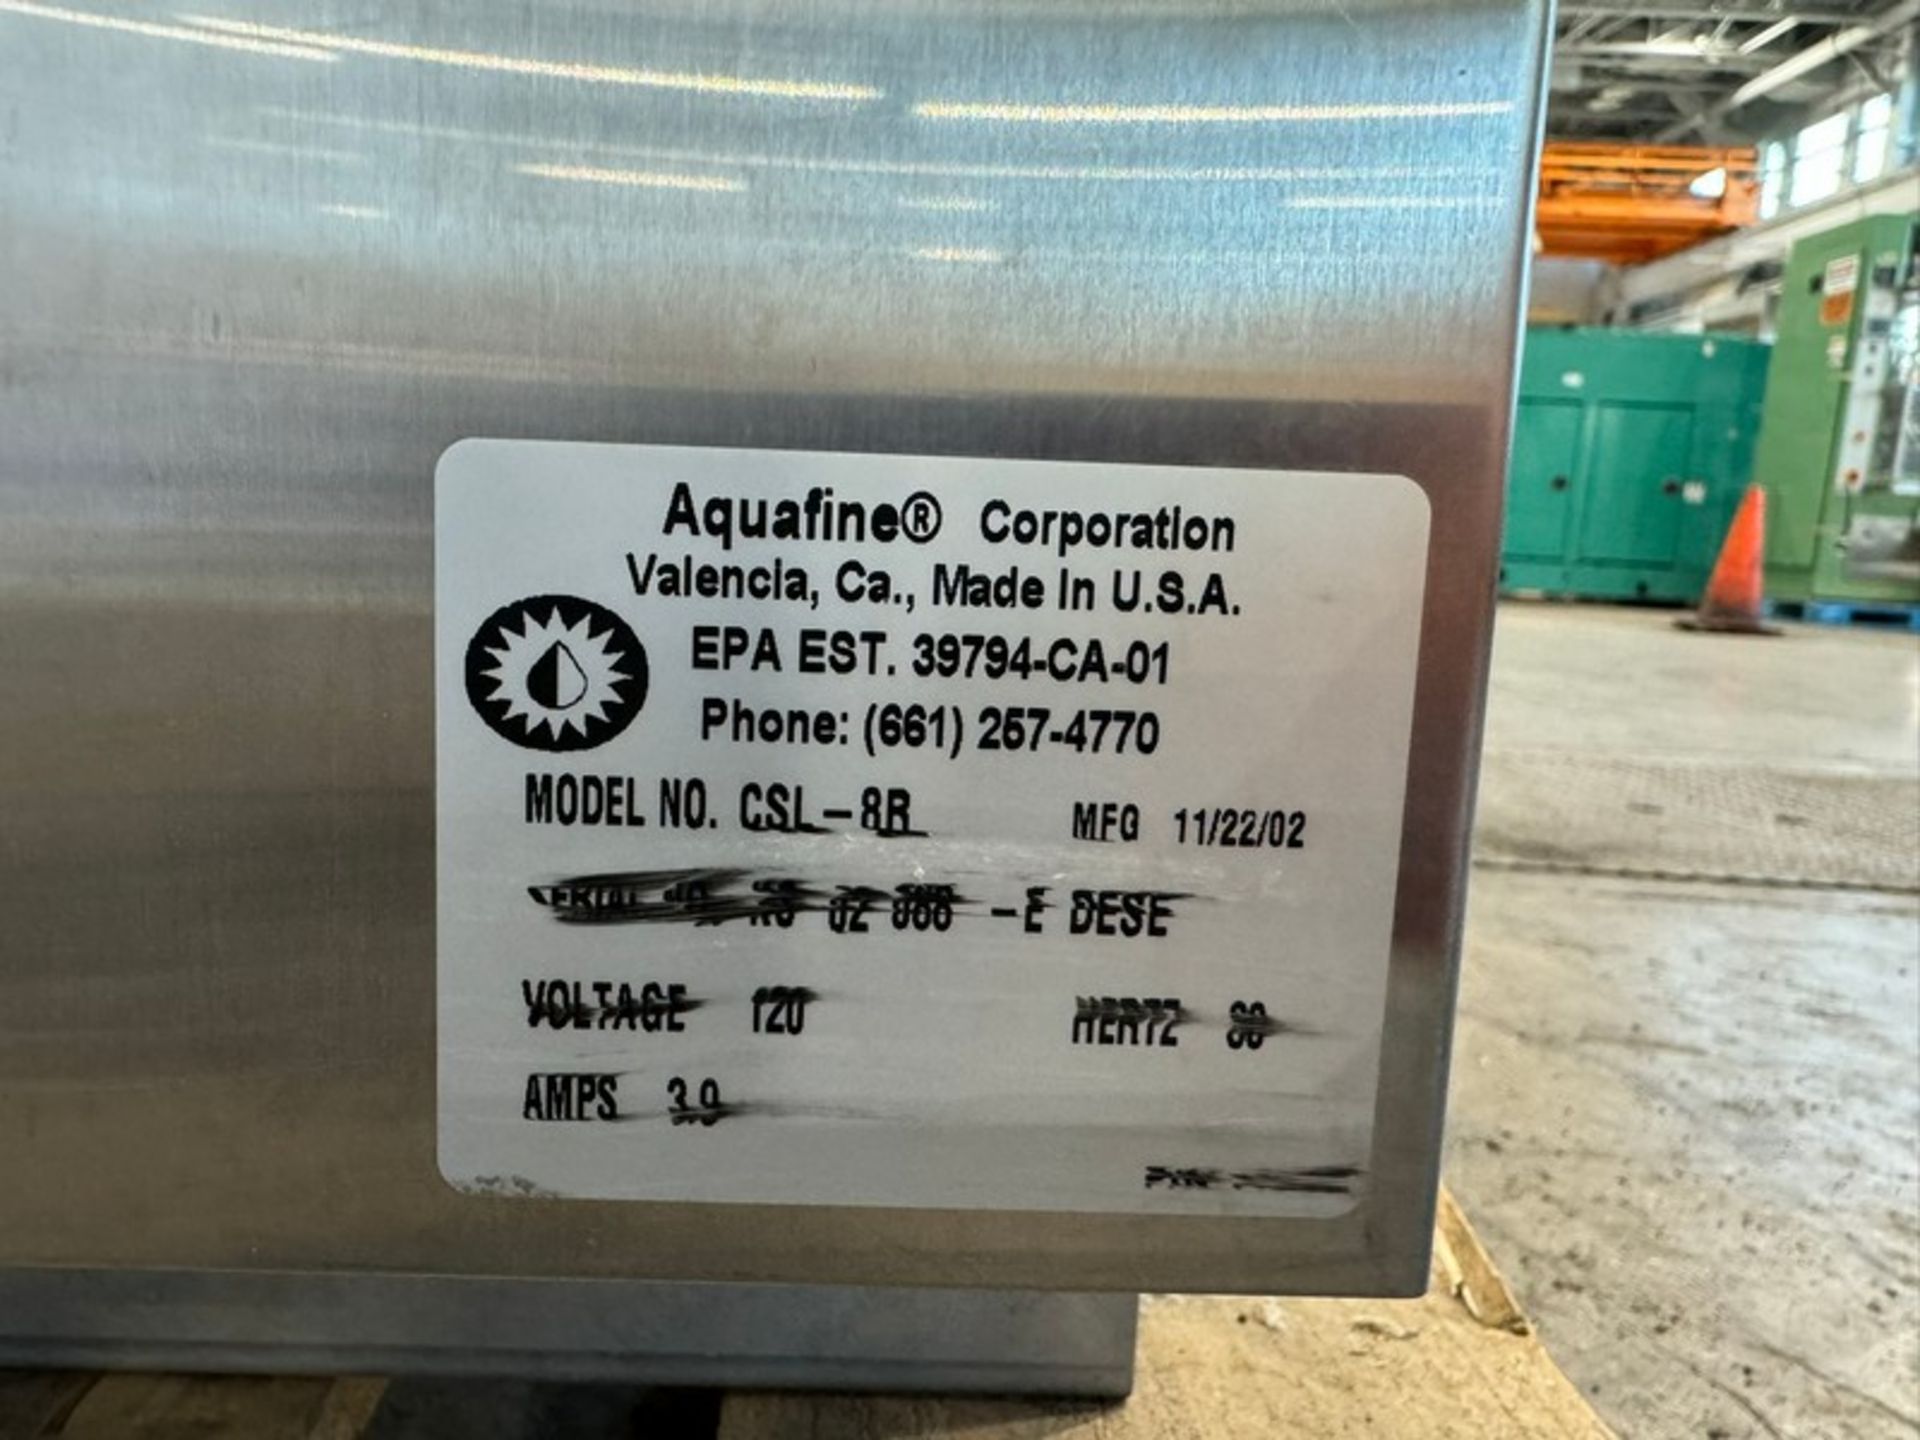 Aquafine S/S Ultraviolet Disinfection Unit, M/N CSL-8R, 120 Volts, with Aprox. 3" Clamp Type Inlet/ - Image 8 of 8